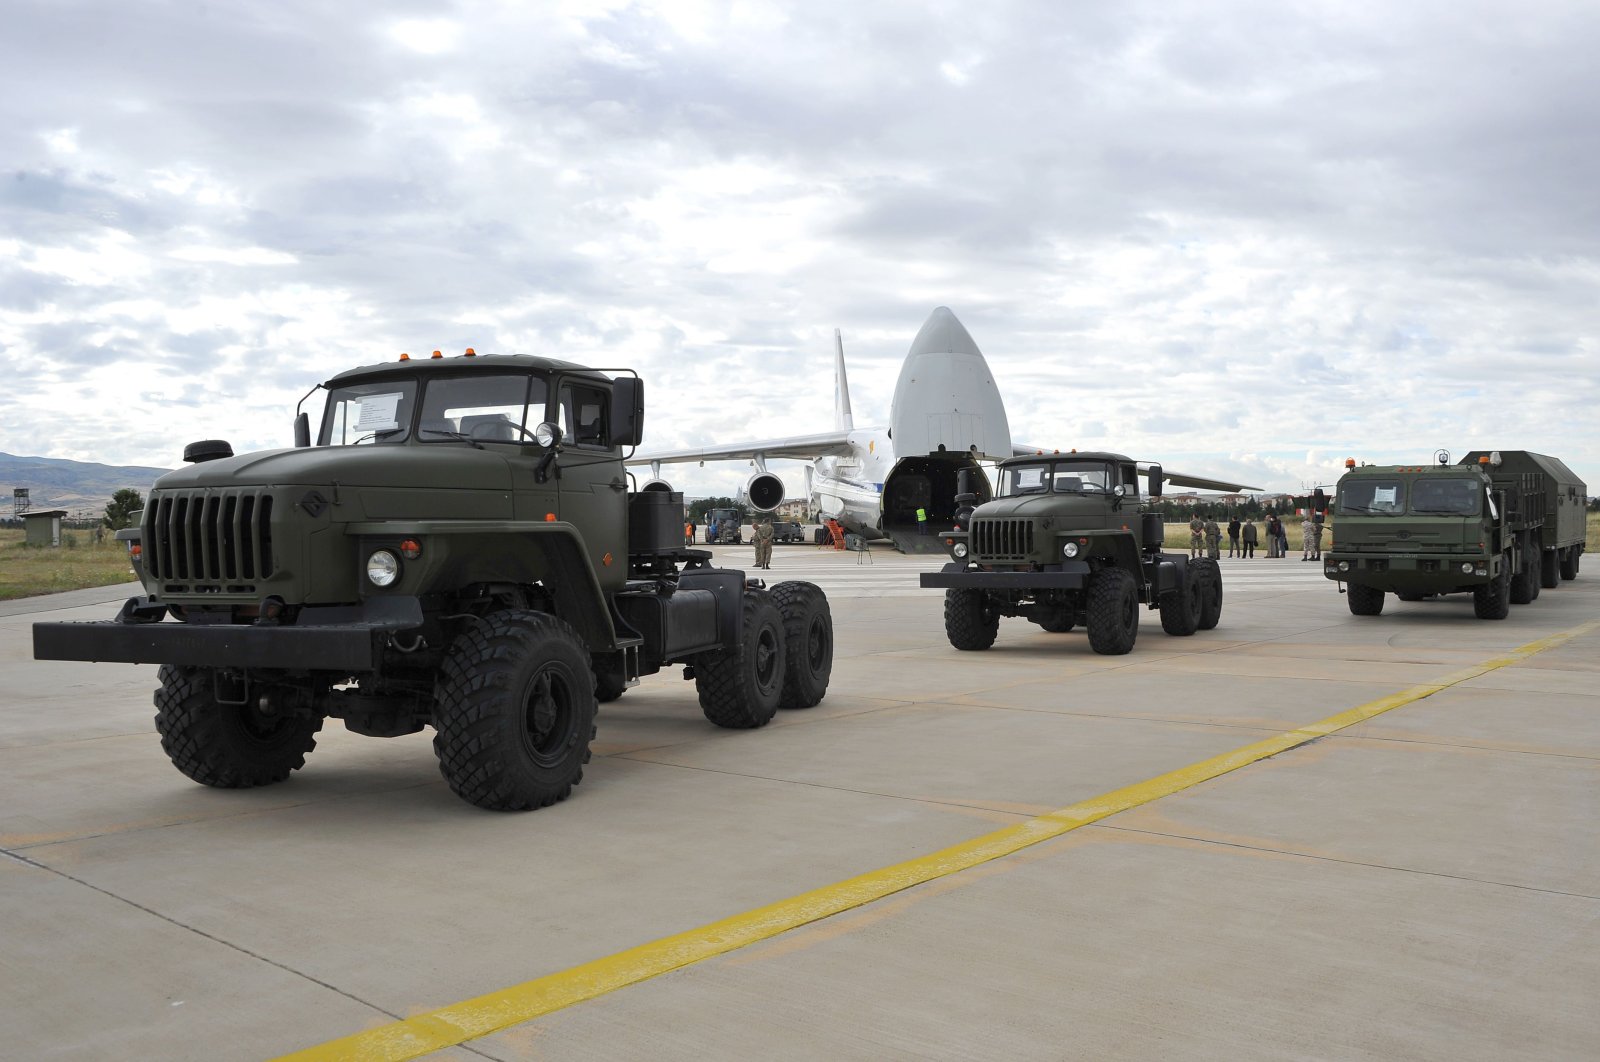 Turkish Defense Ministry photo shows a Russian military cargo plane carrying S-400 missile defense systems from Russia to the Mürted military airbase, Ankara, July 12, 2019. (AFP File Photo)